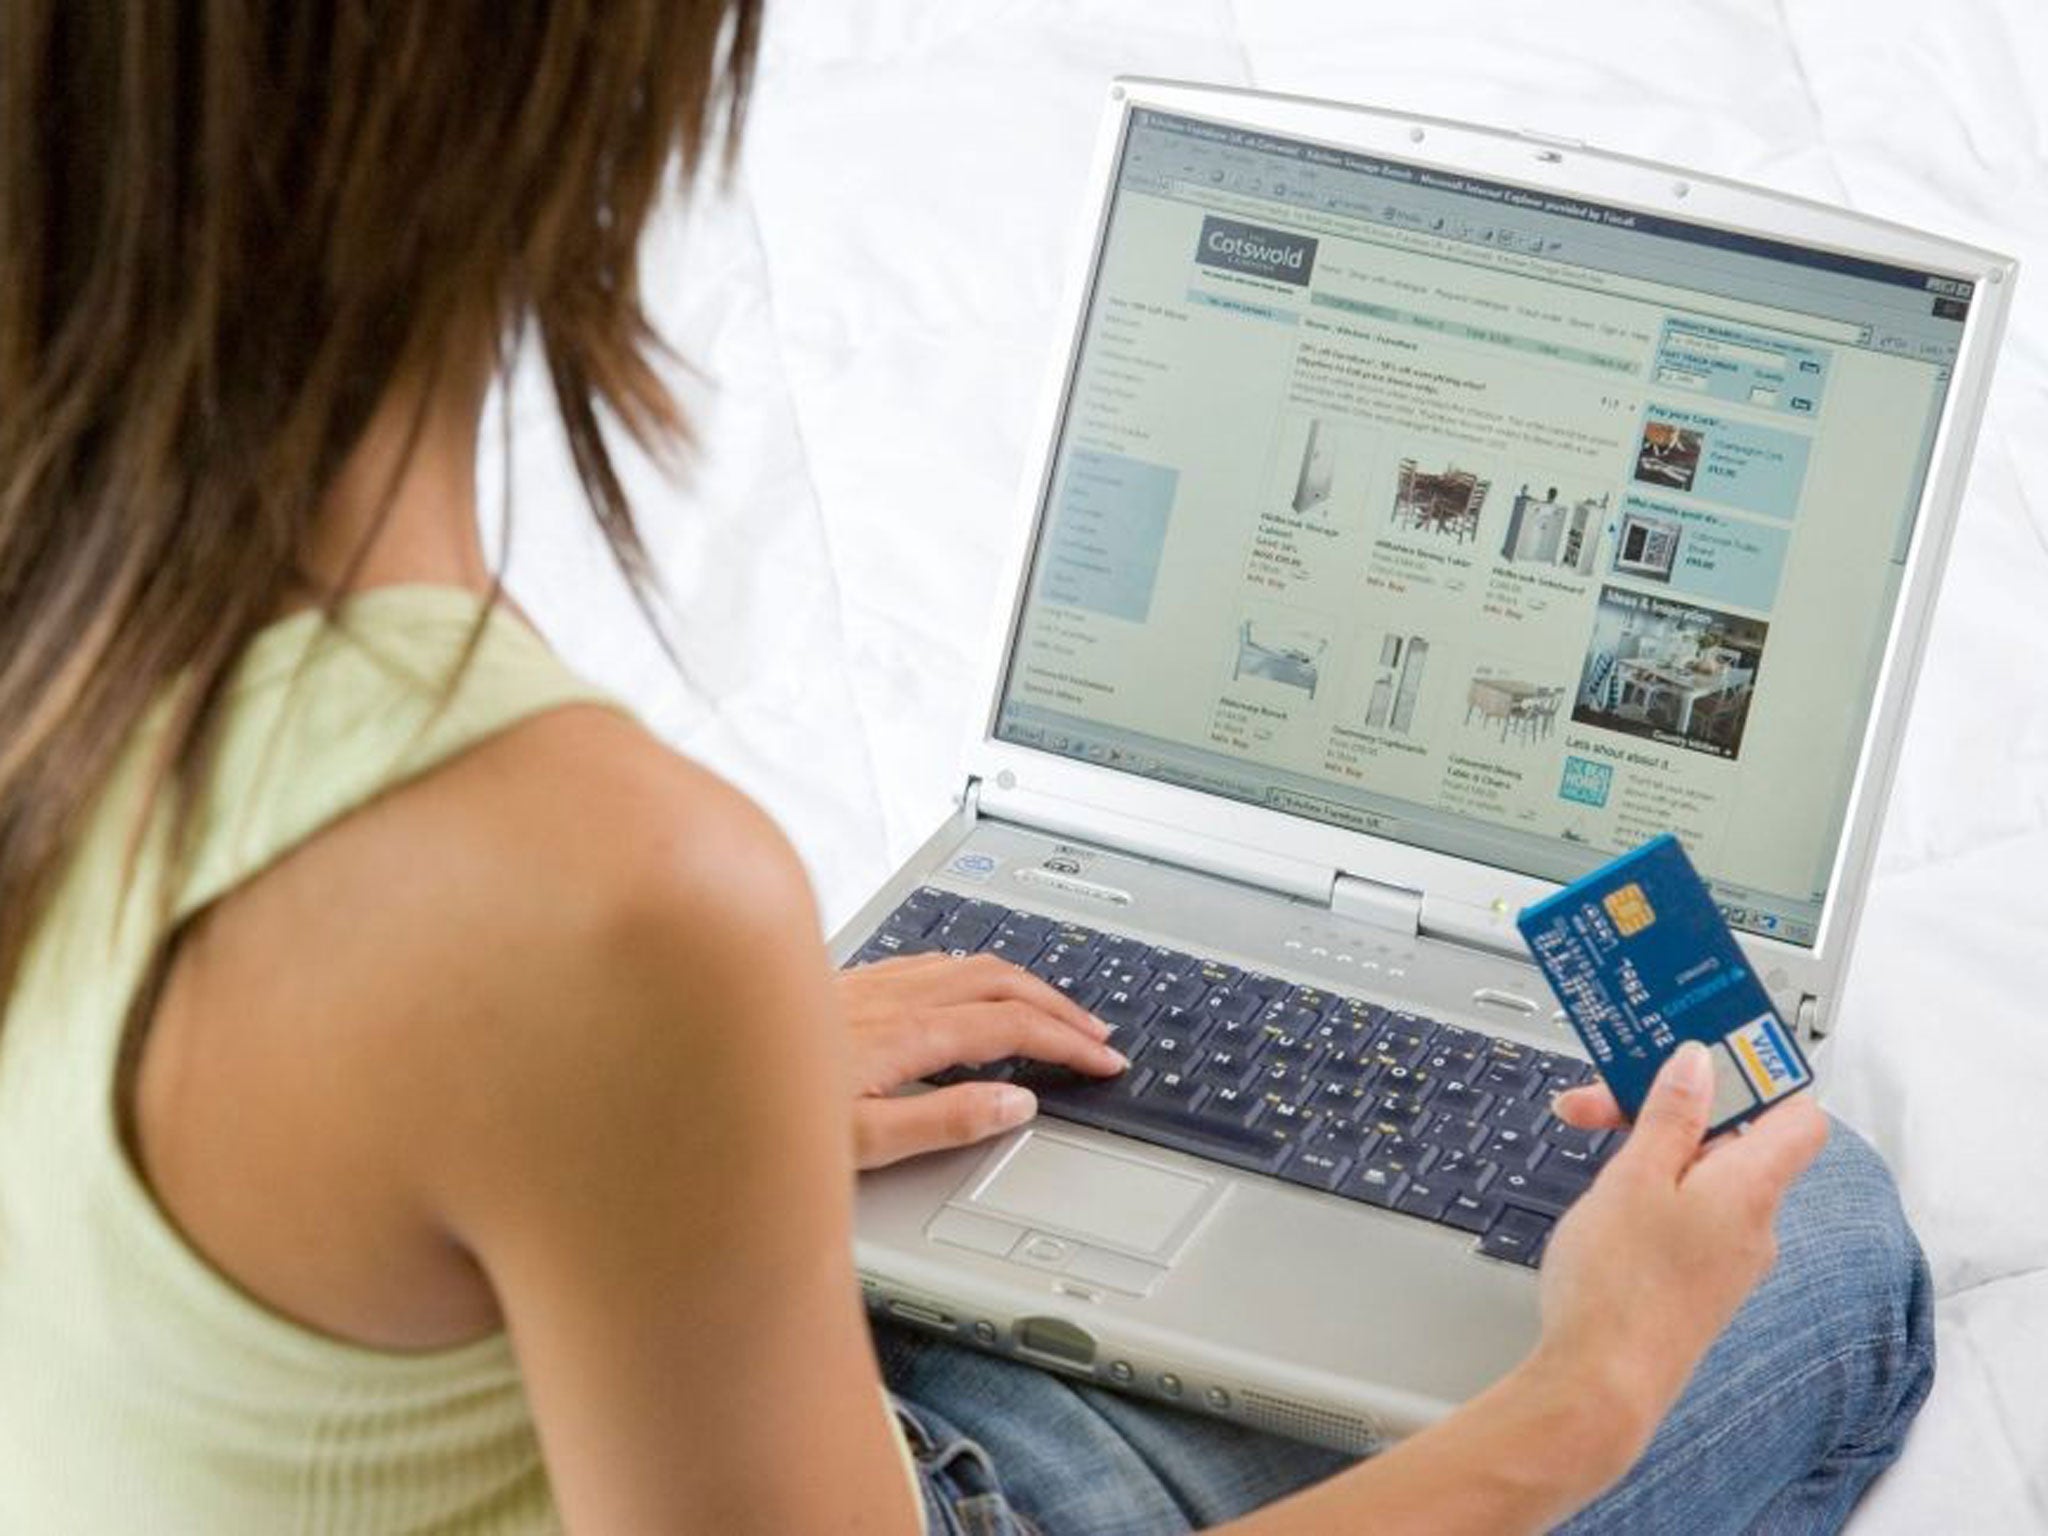 A shopper uses a credit card to buy goods on the internet